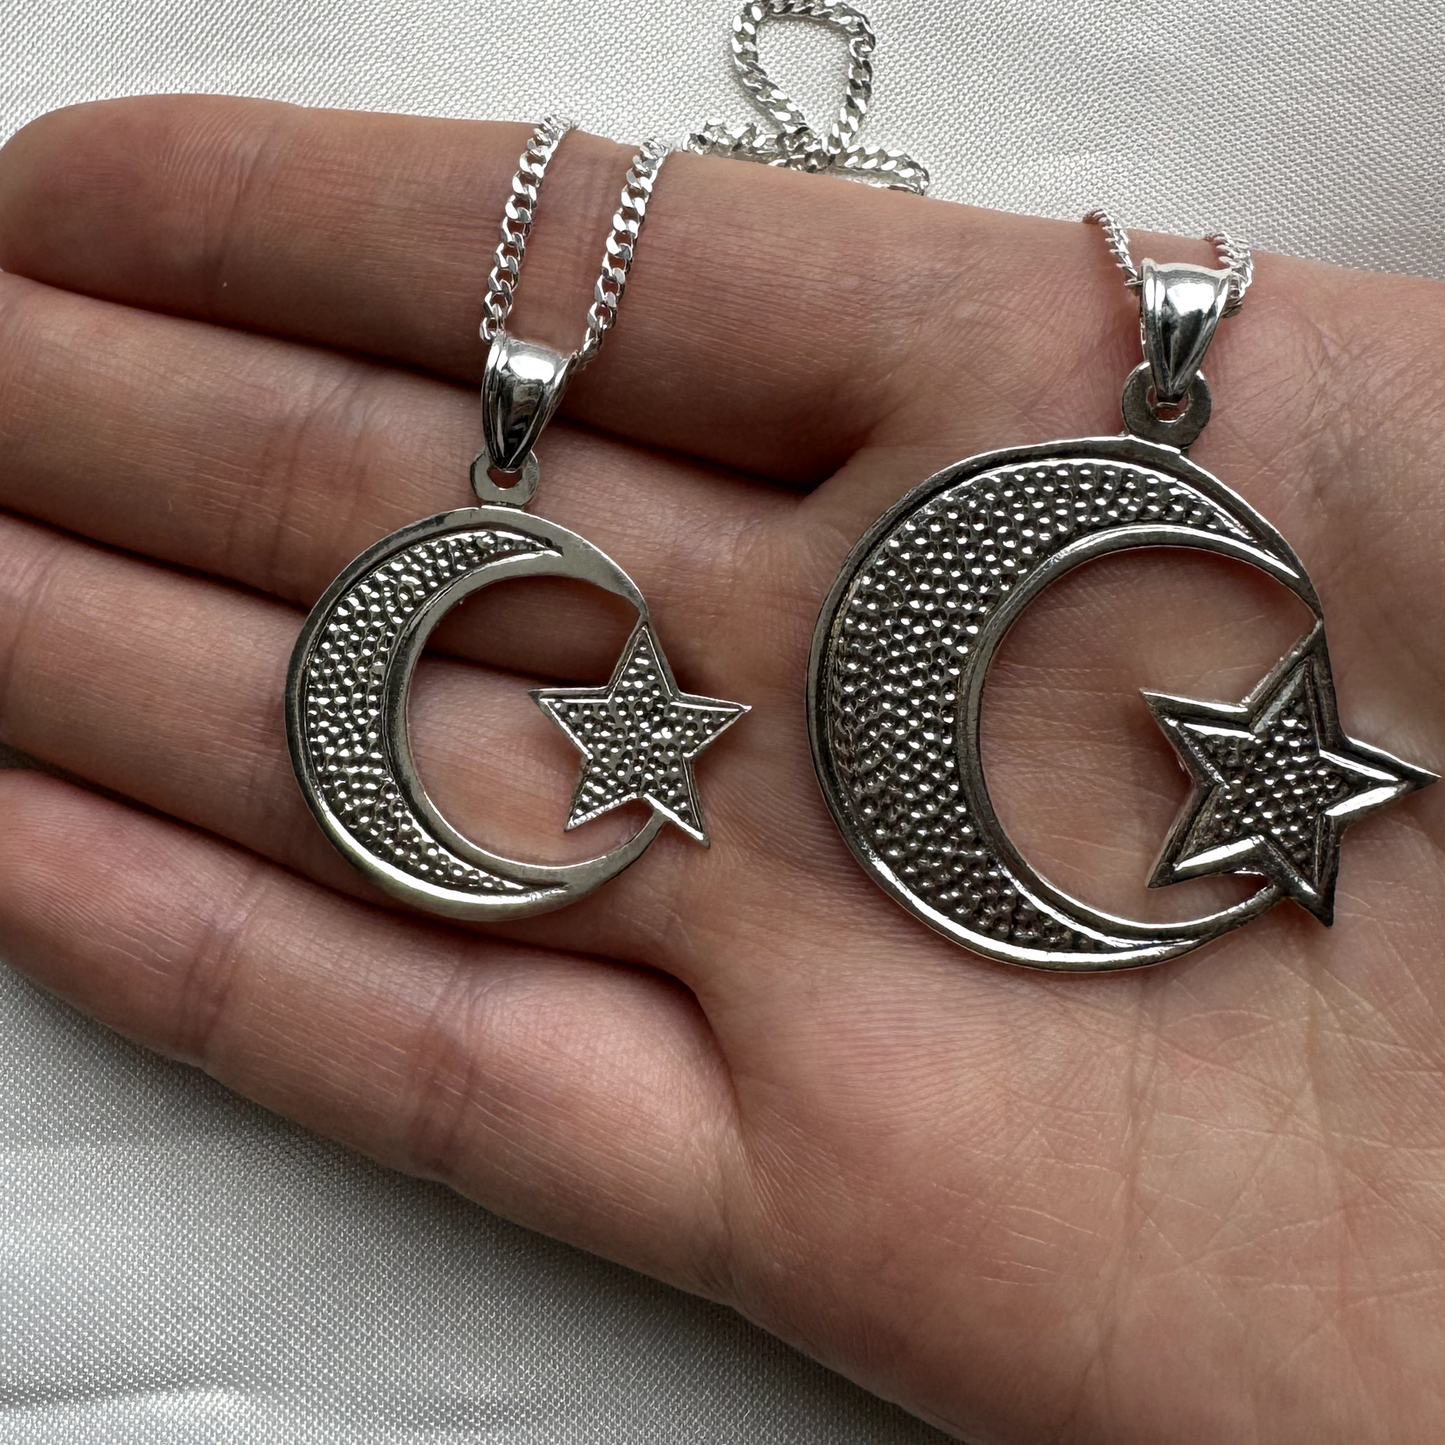 Better Jewelry Sterling Silver .925  Muslim / Islam Crescent Moon + Star Pendant w. Cuban Chain (Made in USA)